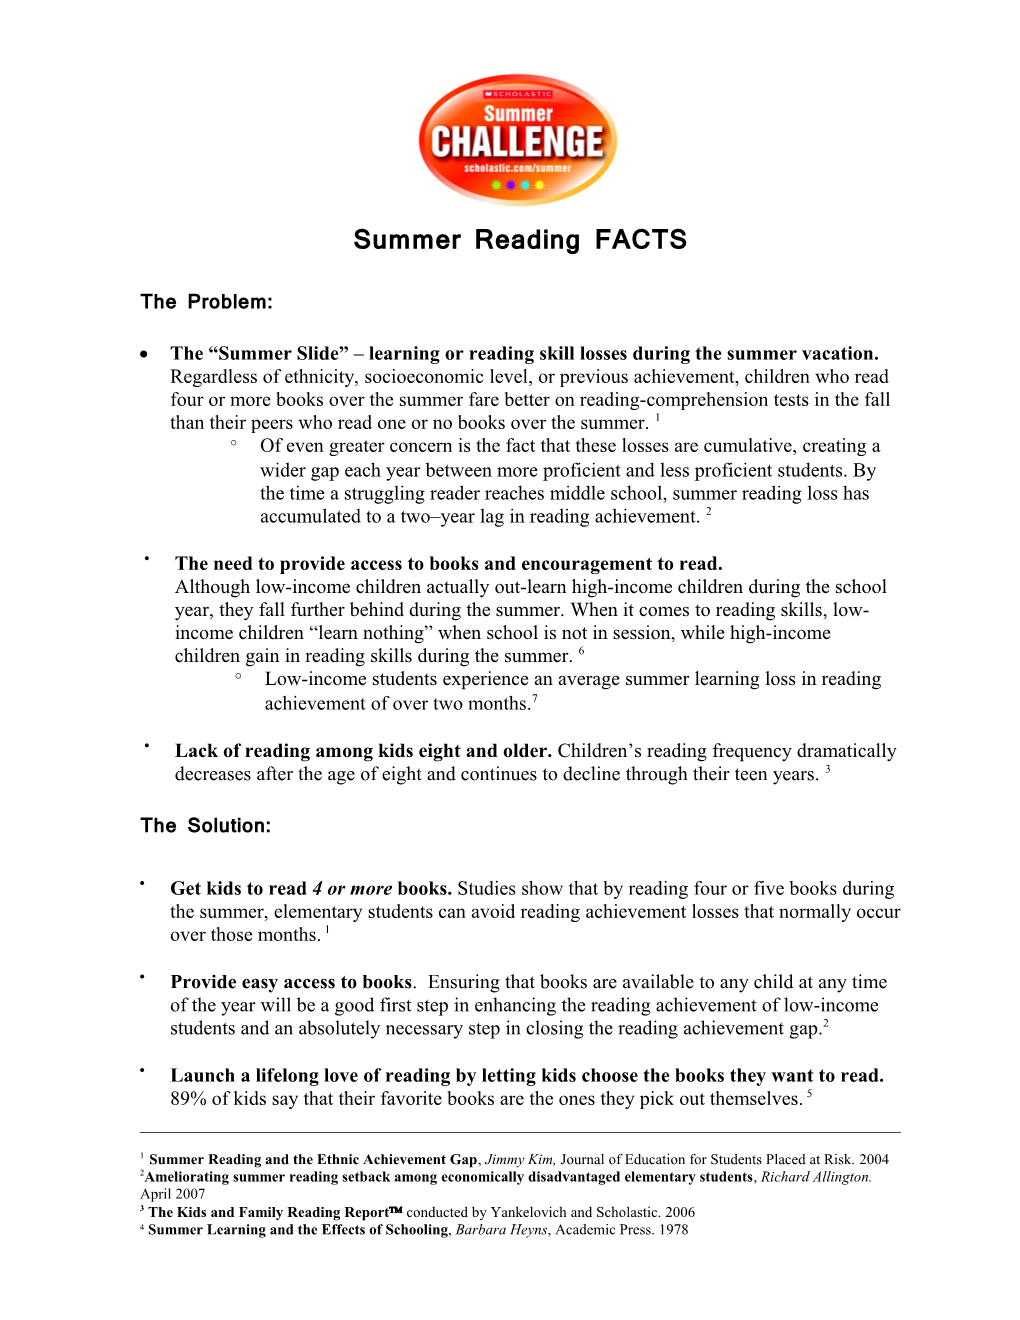 Facts About Summer Reading